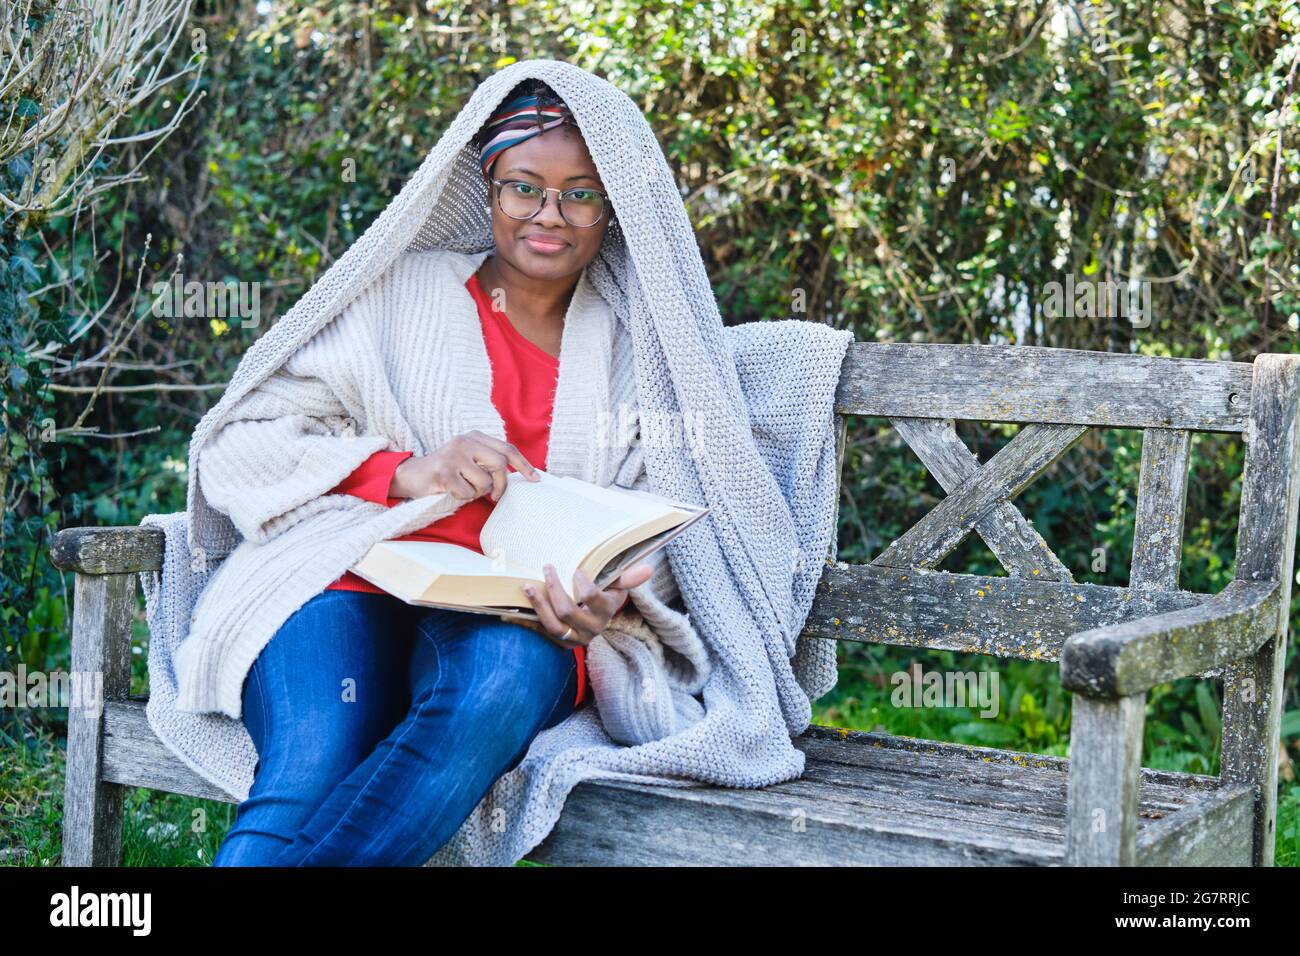 Portrait of a young black woman with afro hairstyle and glasses reading a book sitting on a garden old bench. Lifestyle concept. Stock Photo